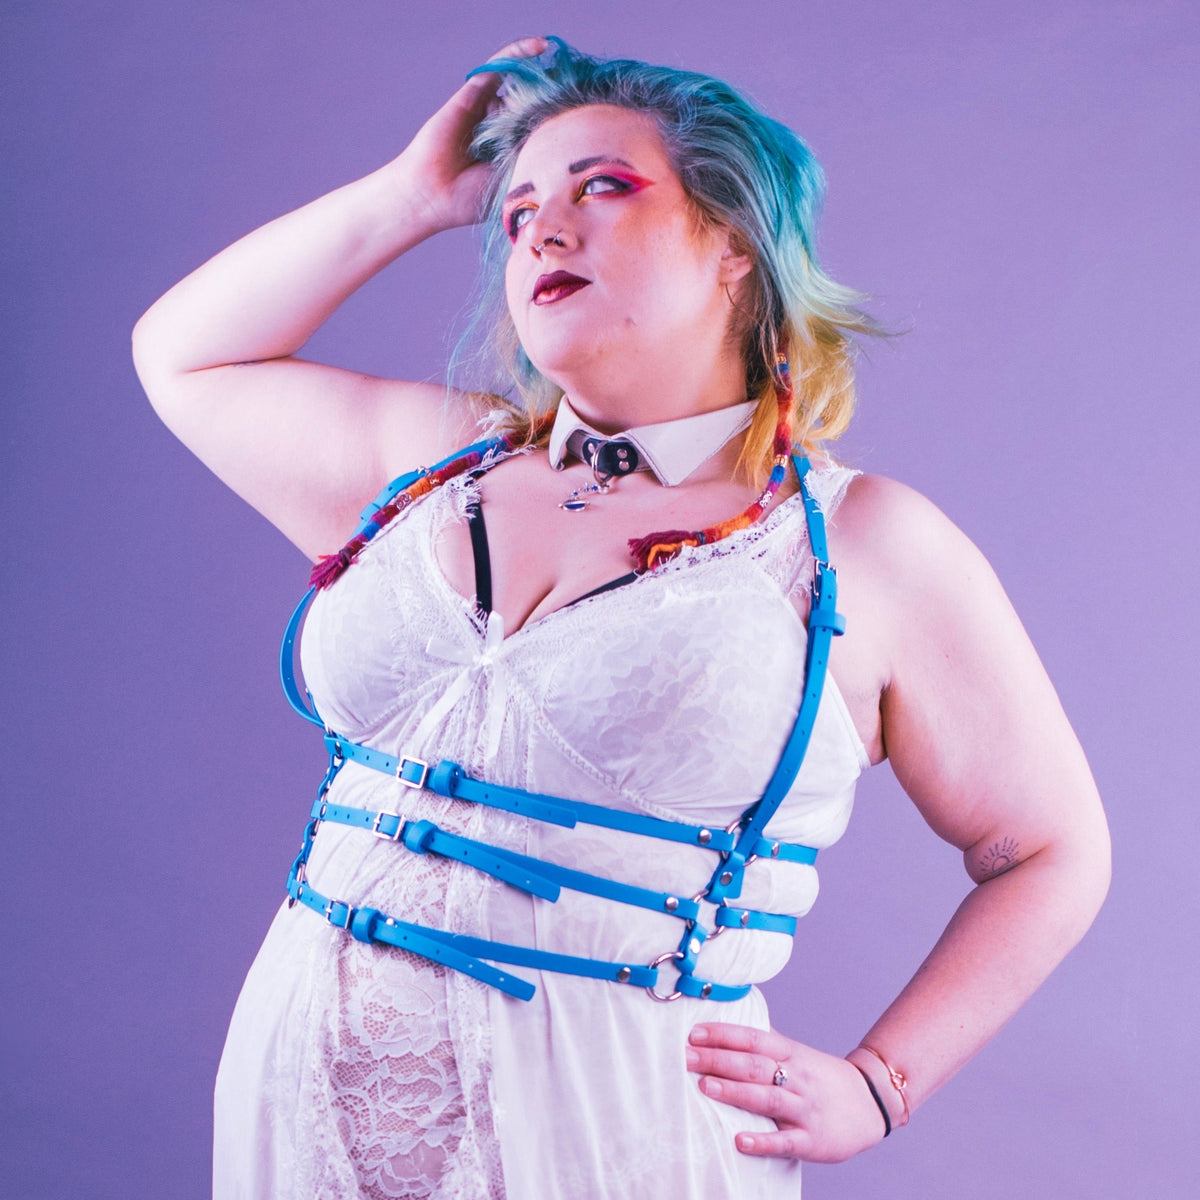 Woman wearing white lingerie with a turquoise body harness over it.